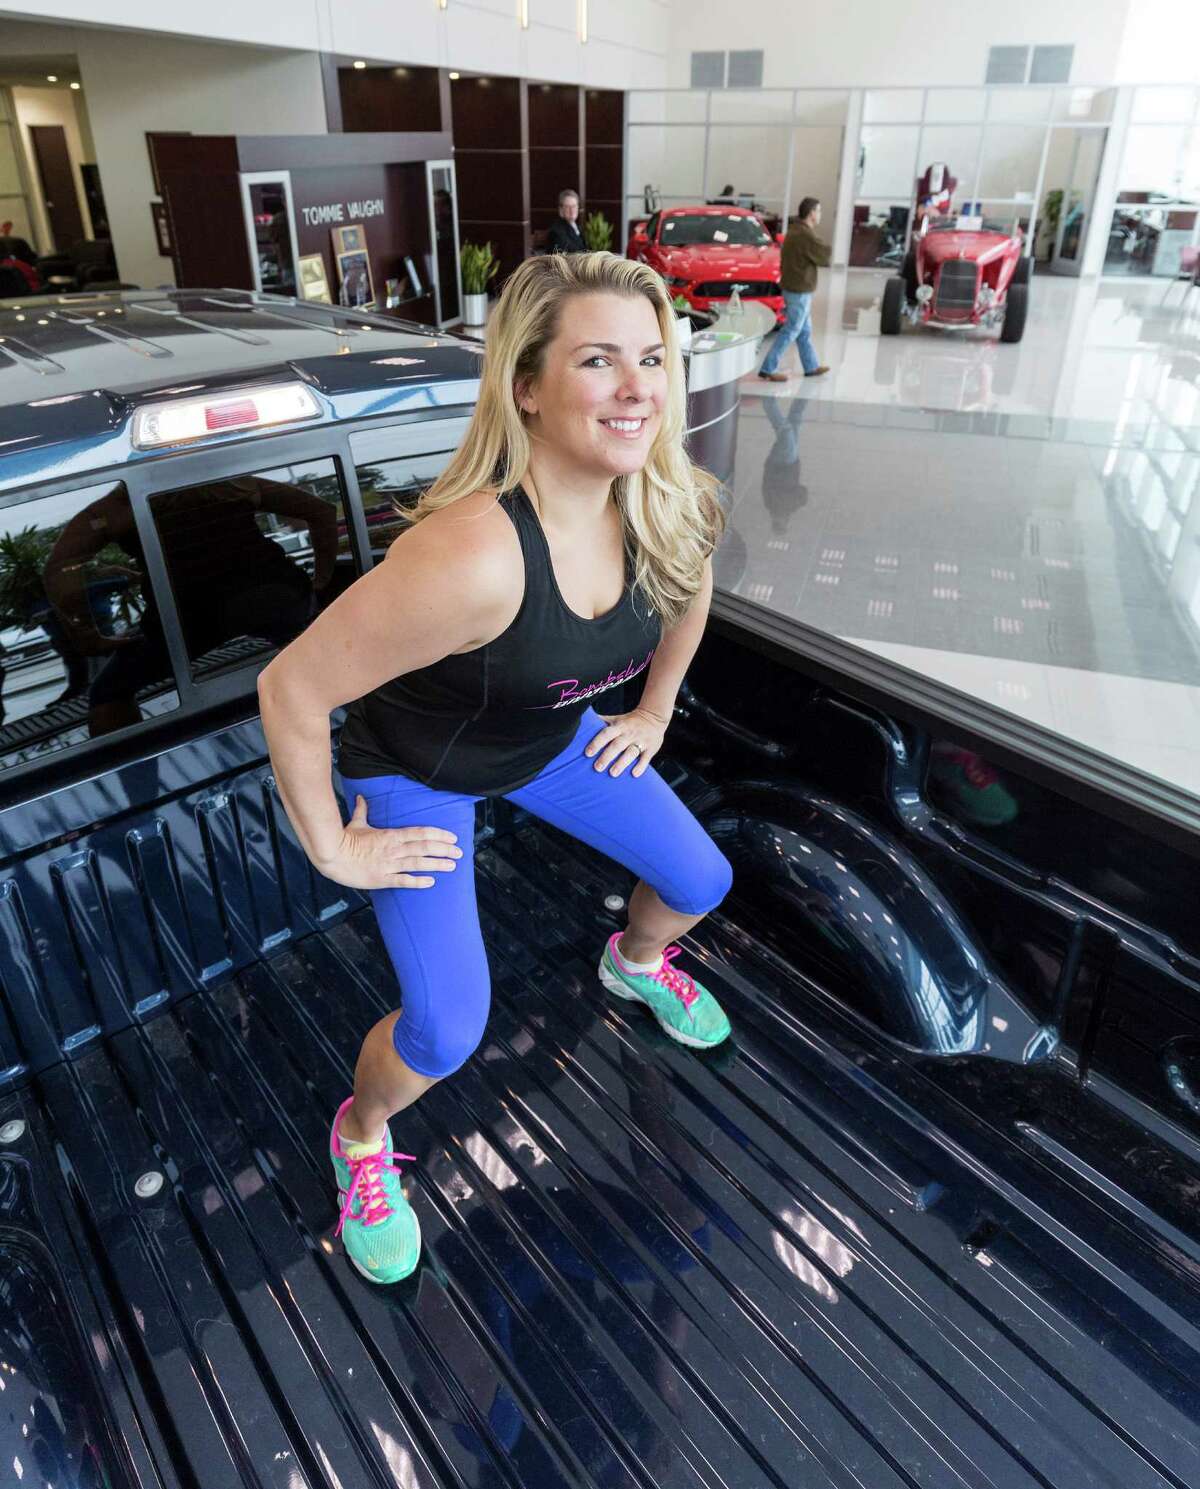 Cari Shoemate demonstrates her new workout regime on a Ford pickup inside the showroom of Tommie Vaughn Ford, 1201 N. Shepherd Drive. ID: Shoemate demonstrates squats in the bed of the truck. Friday November 4, 2014 (Craig H. Hartley/For the Chronicle)